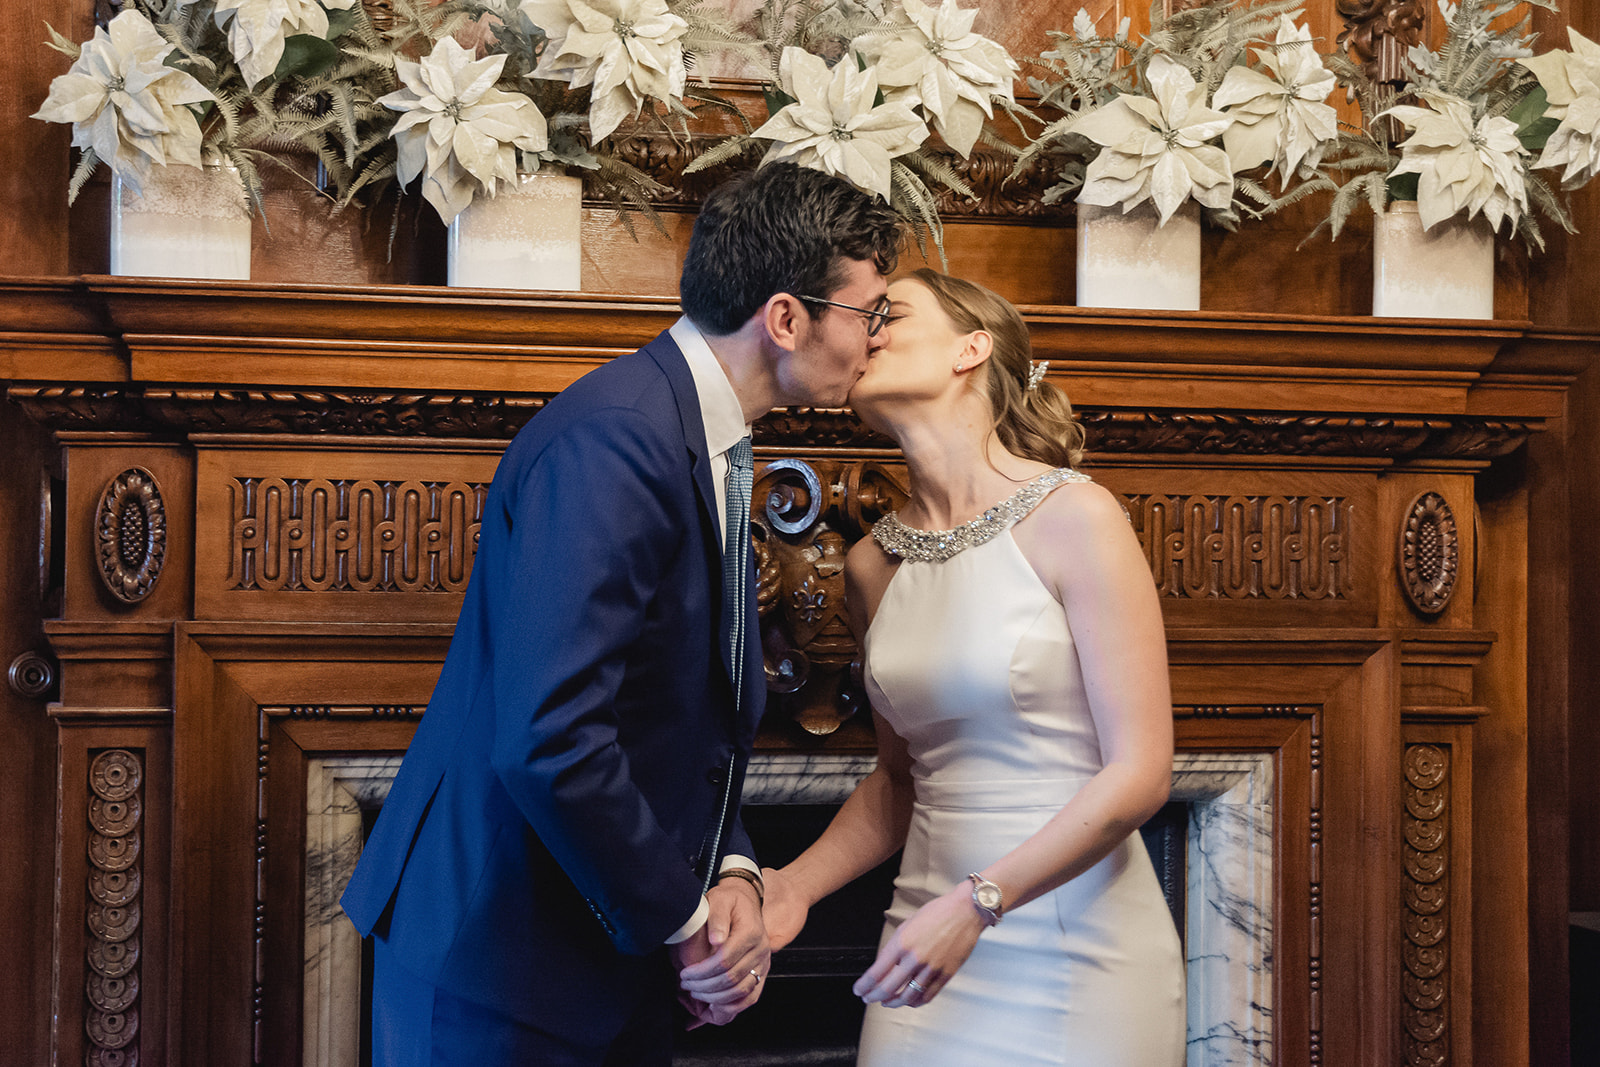 Kinga and Jean-Marc share kiss during the wedding ceremony in the Marylebone Room at The Old Marylebone Town Hall